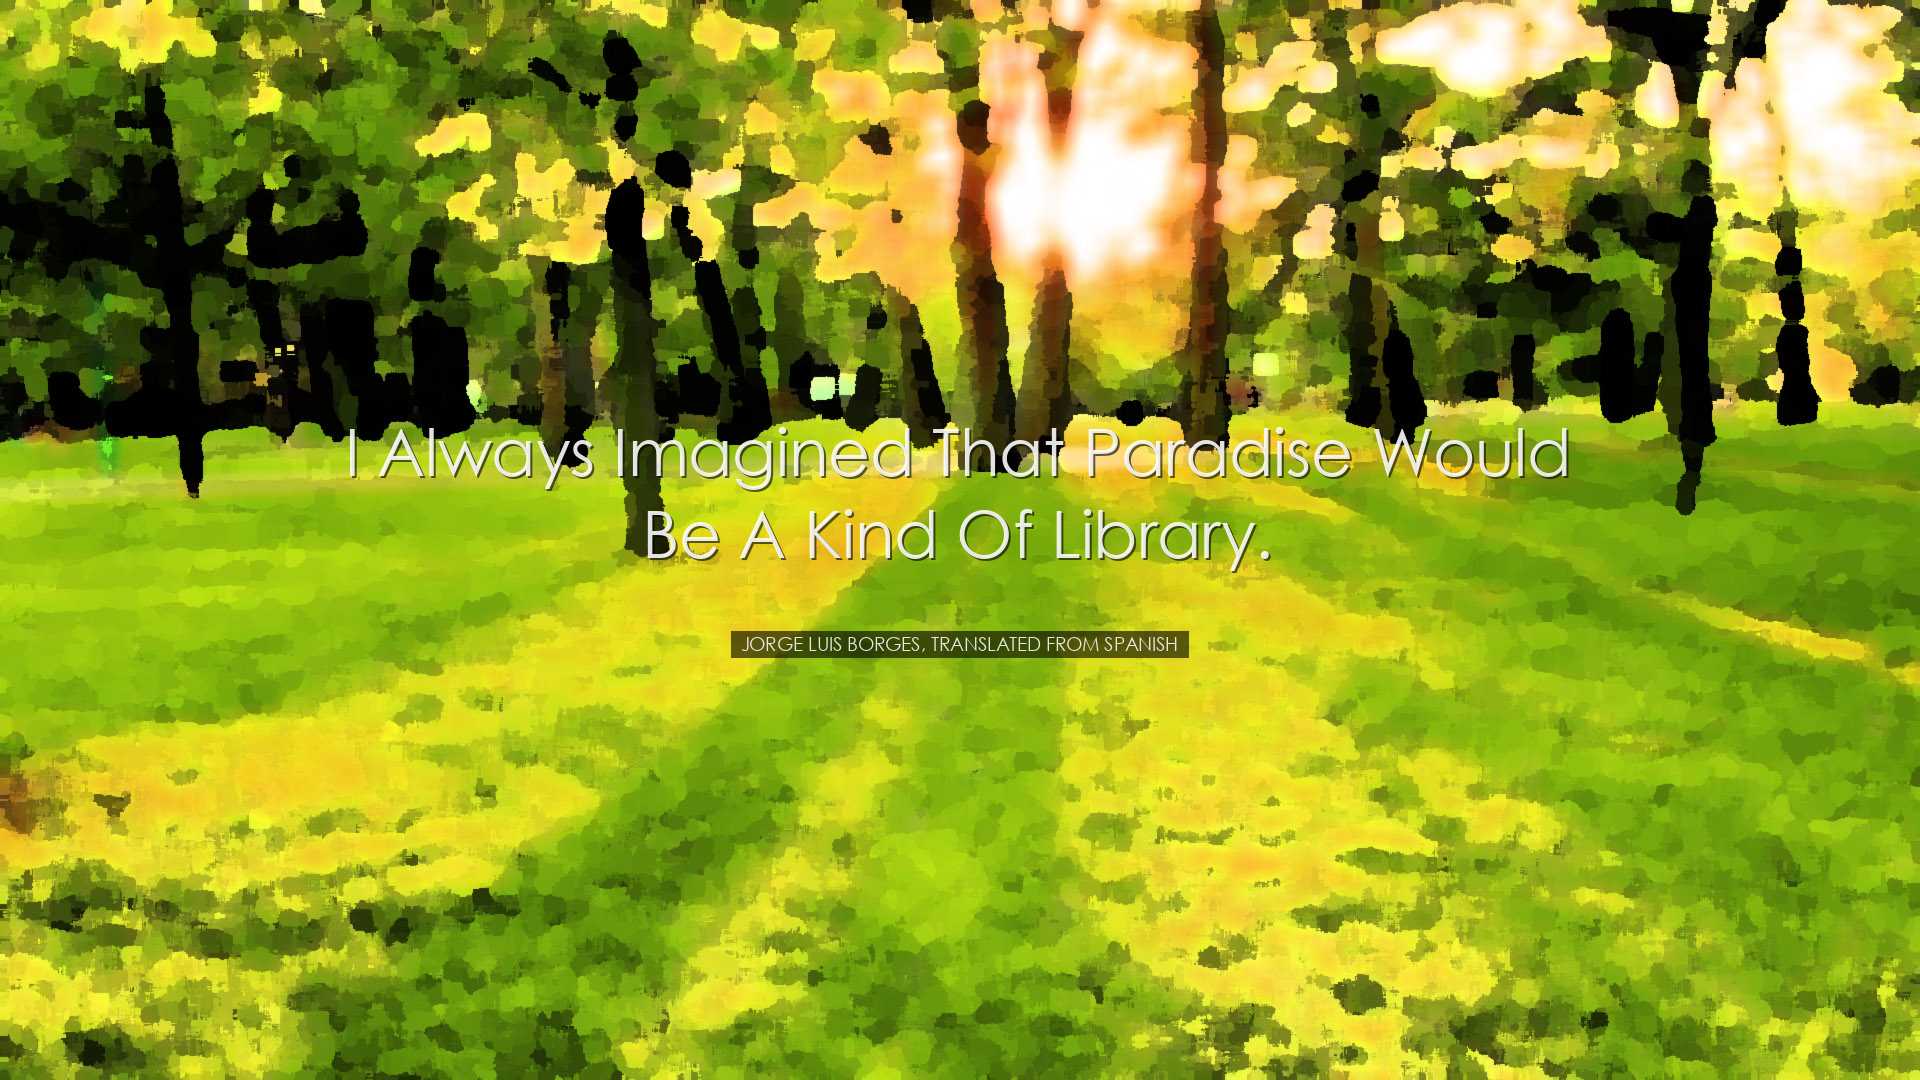 I always imagined that Paradise would be a kind of library. - Jorg